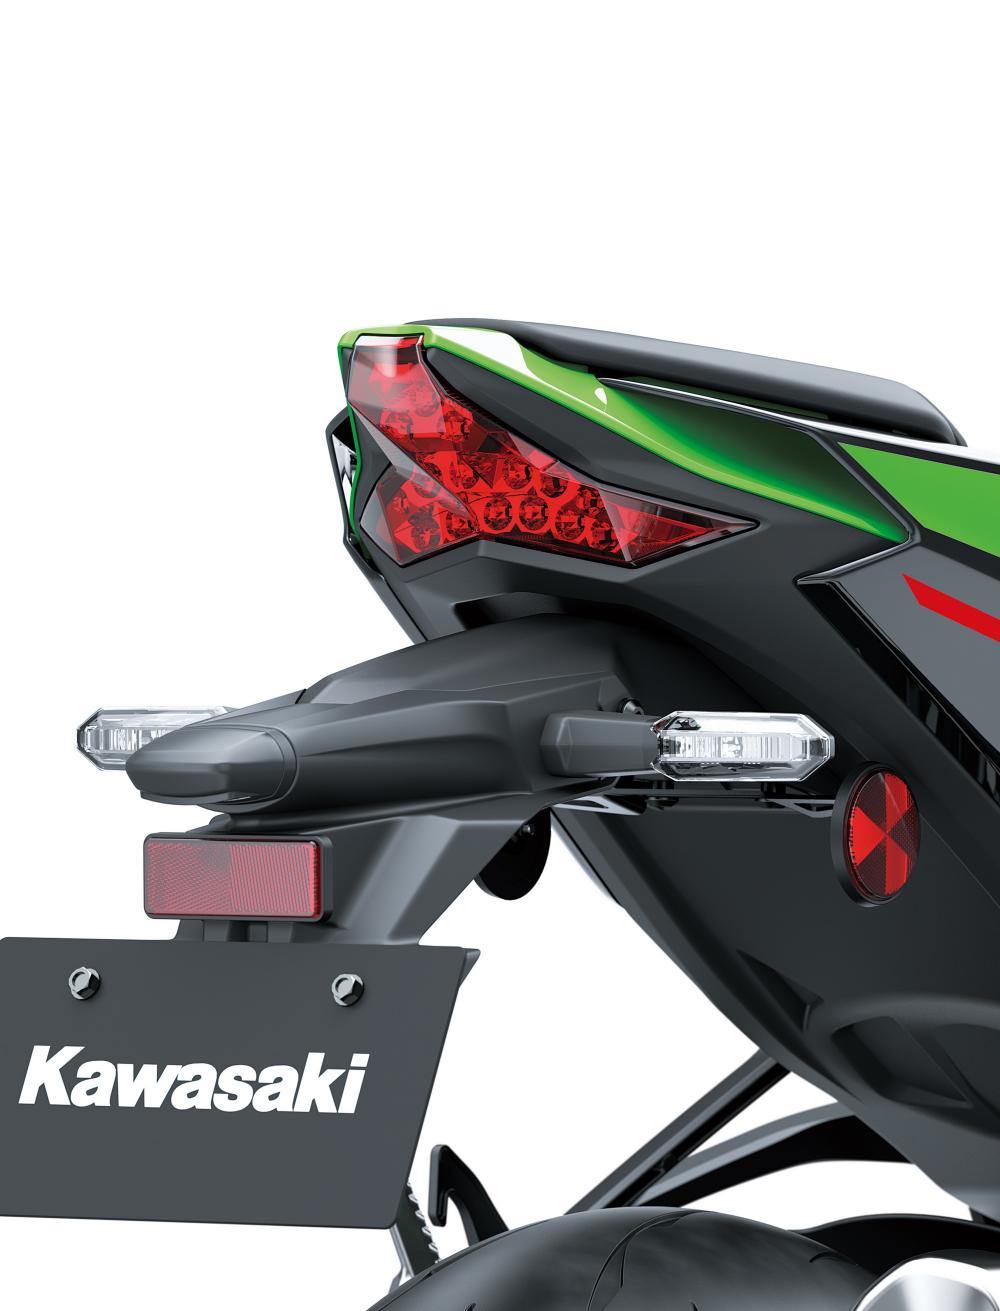 Kawasaki US brings a new paint scheme for the 2022 ZX-10R 